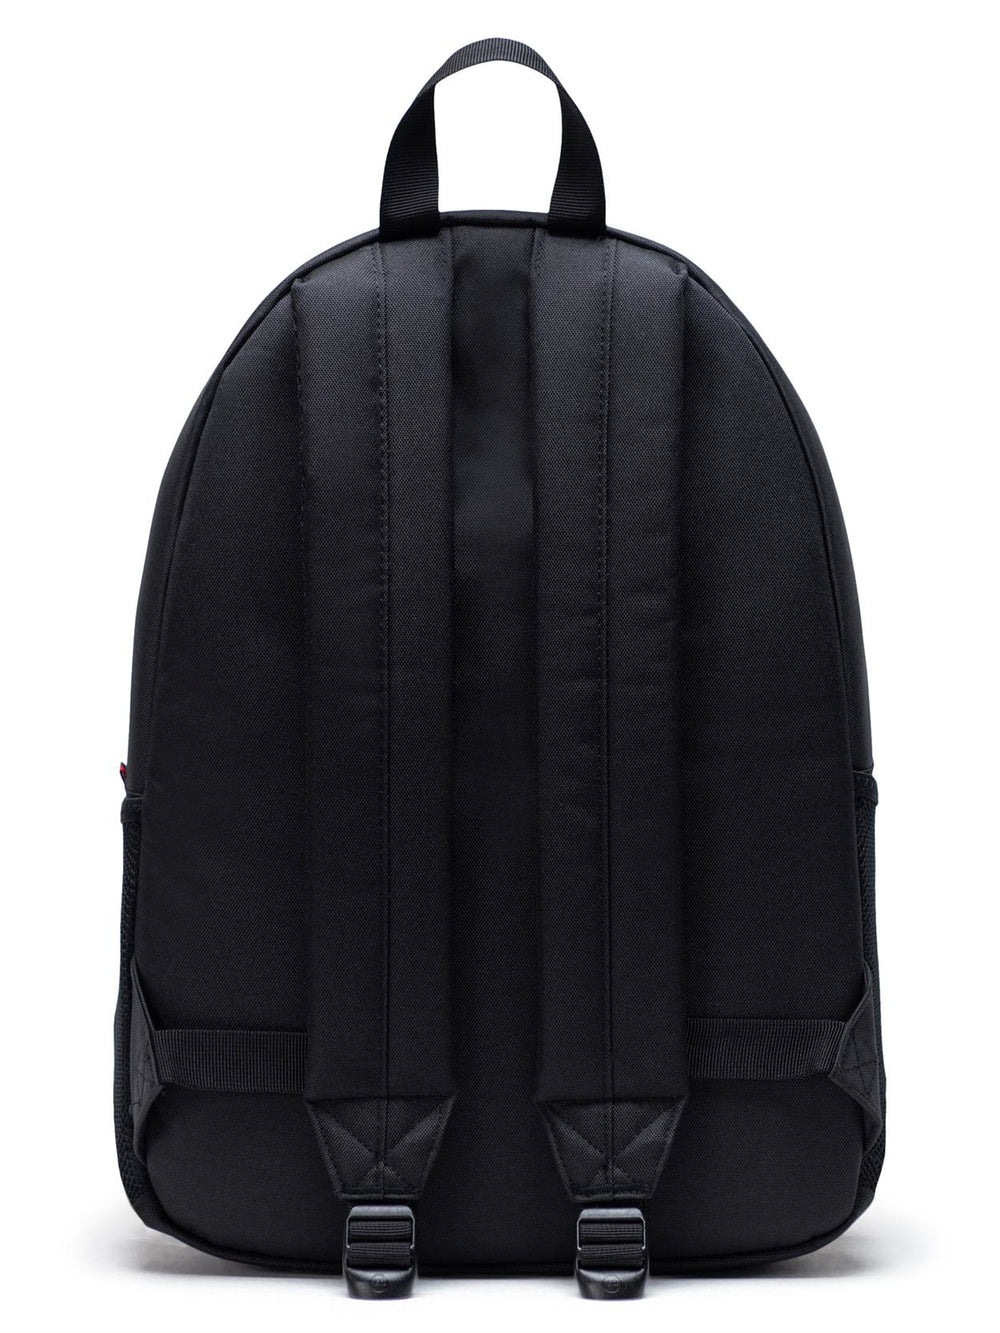 HERSCHEL SUPPLY CO. CLASSIC XL ATHLETIC 30L LOGO BACKPACK - CLEARANCE